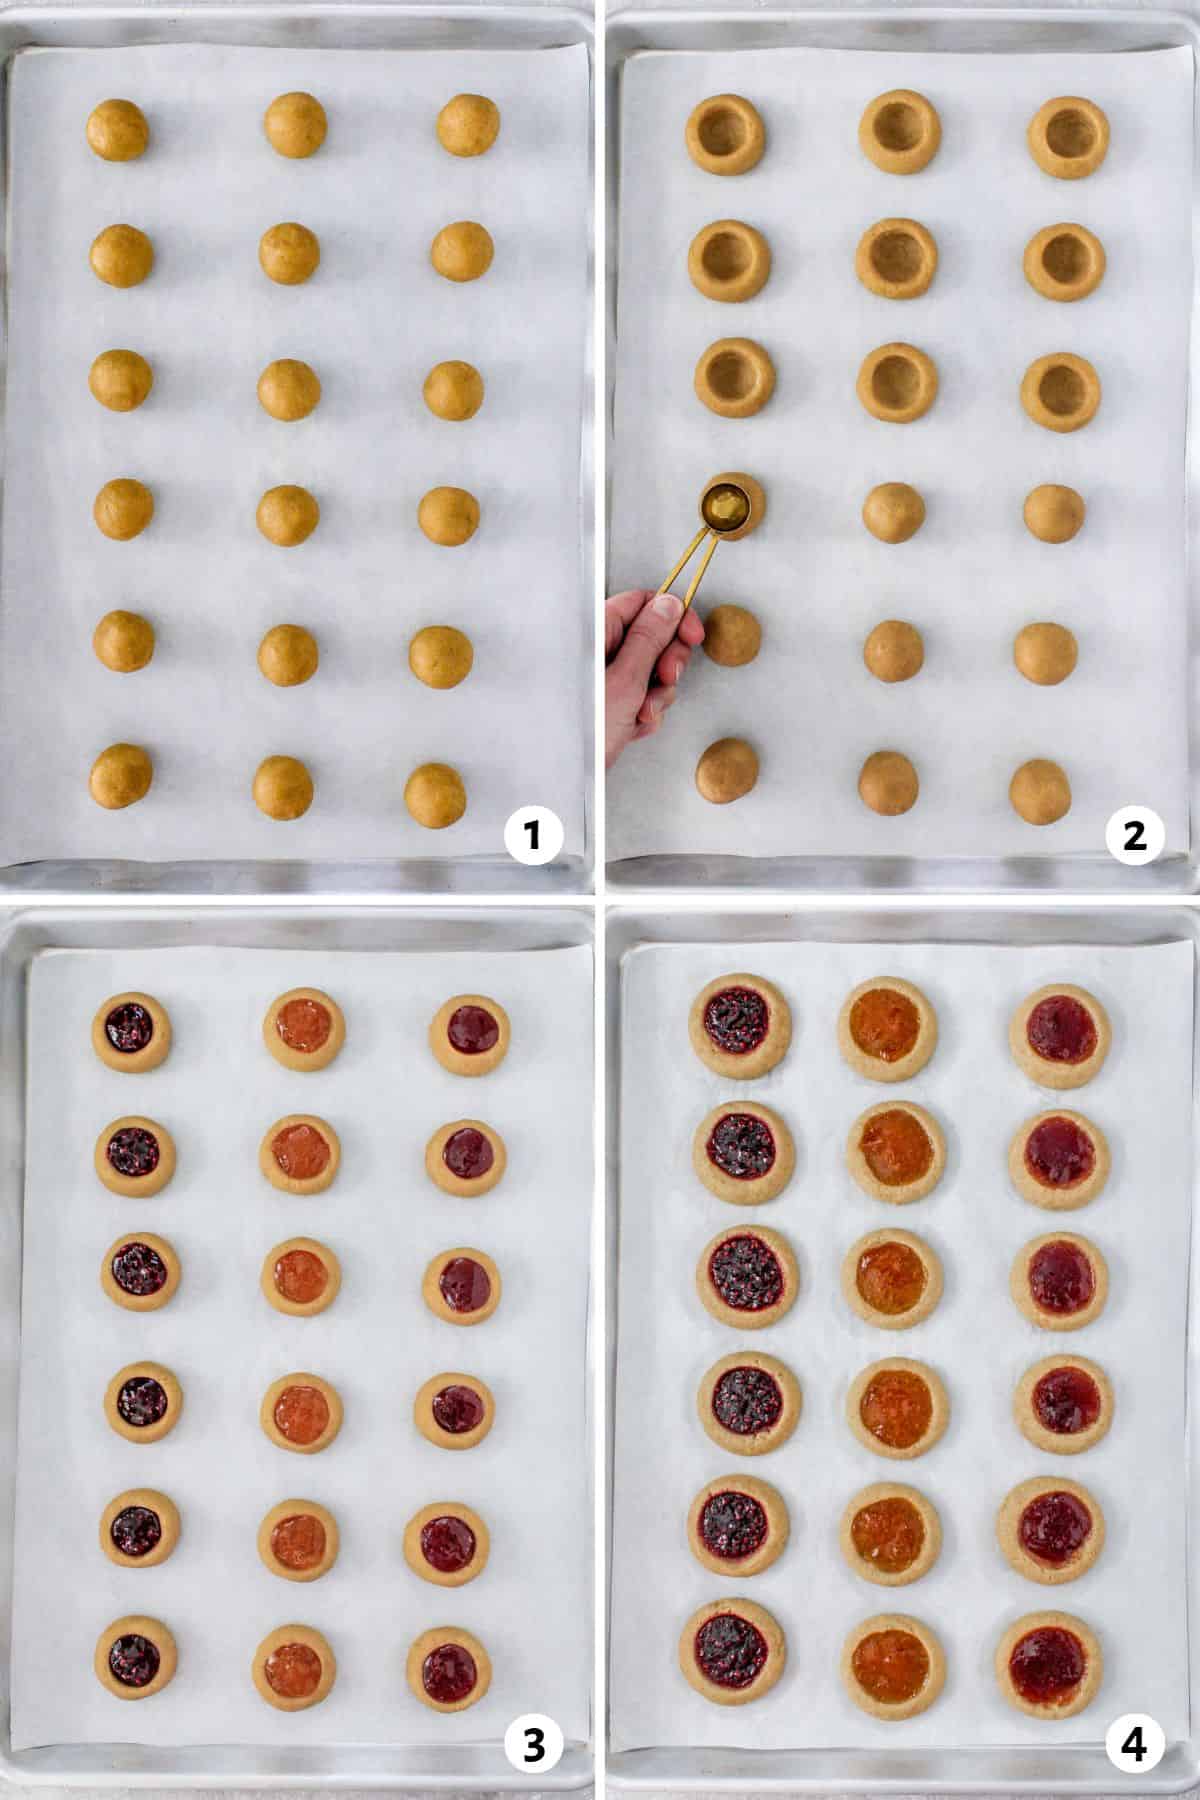 4 image collage: 1- cookie dough balls on a parchment lined baking sheet, 2- a small spoon pressing indentions into cookie dough balls, 3- jam filled inside before baking, 4- cookies after baking.